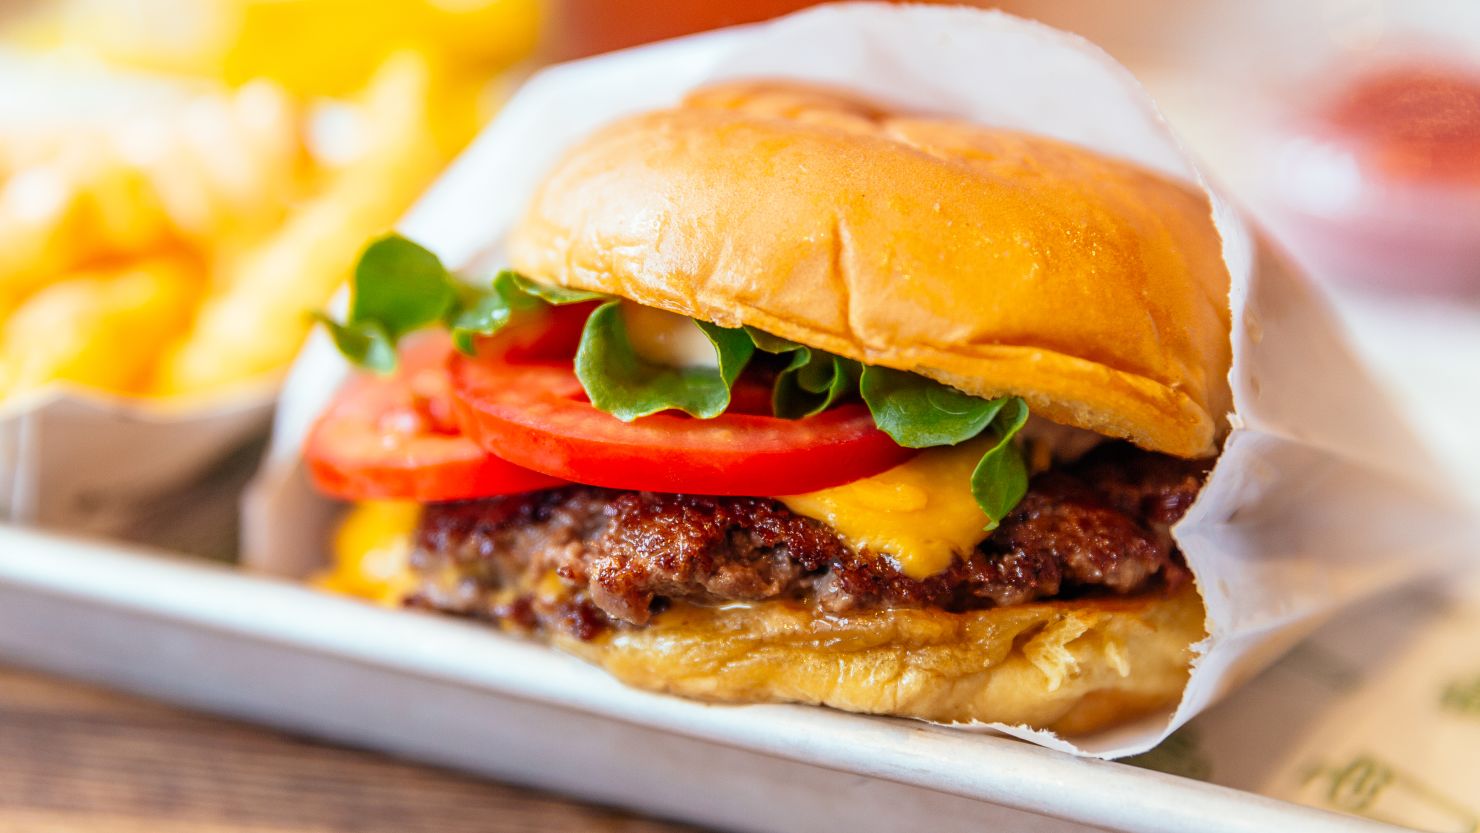 Overall food inflation is easing, but pricier burgers have become flame-broiled flashpoints for American consumers.